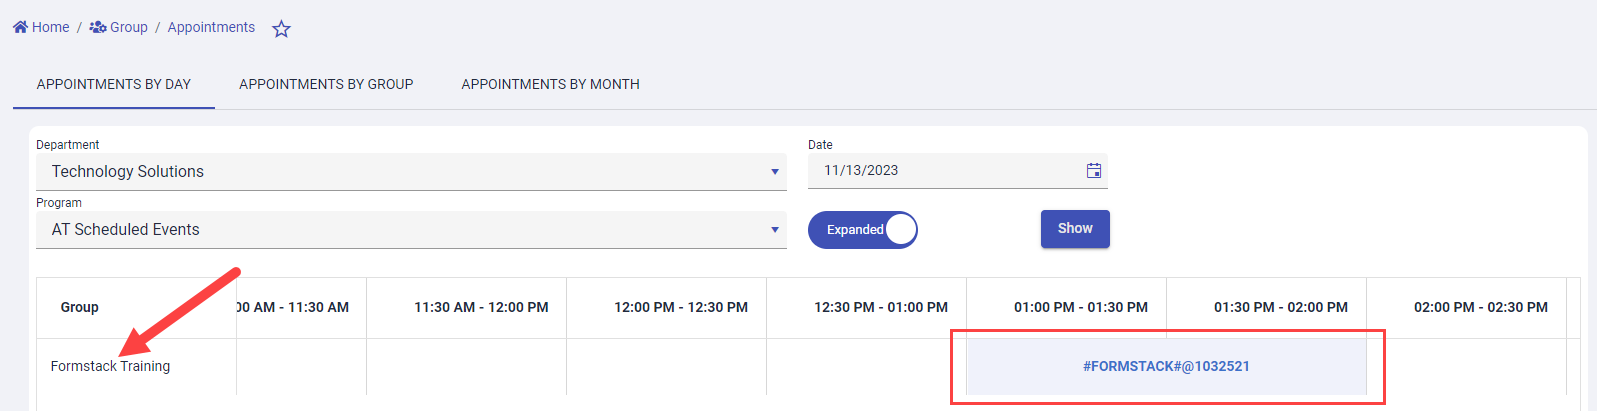 Appointments By Day tab with group calendar and a timeblock